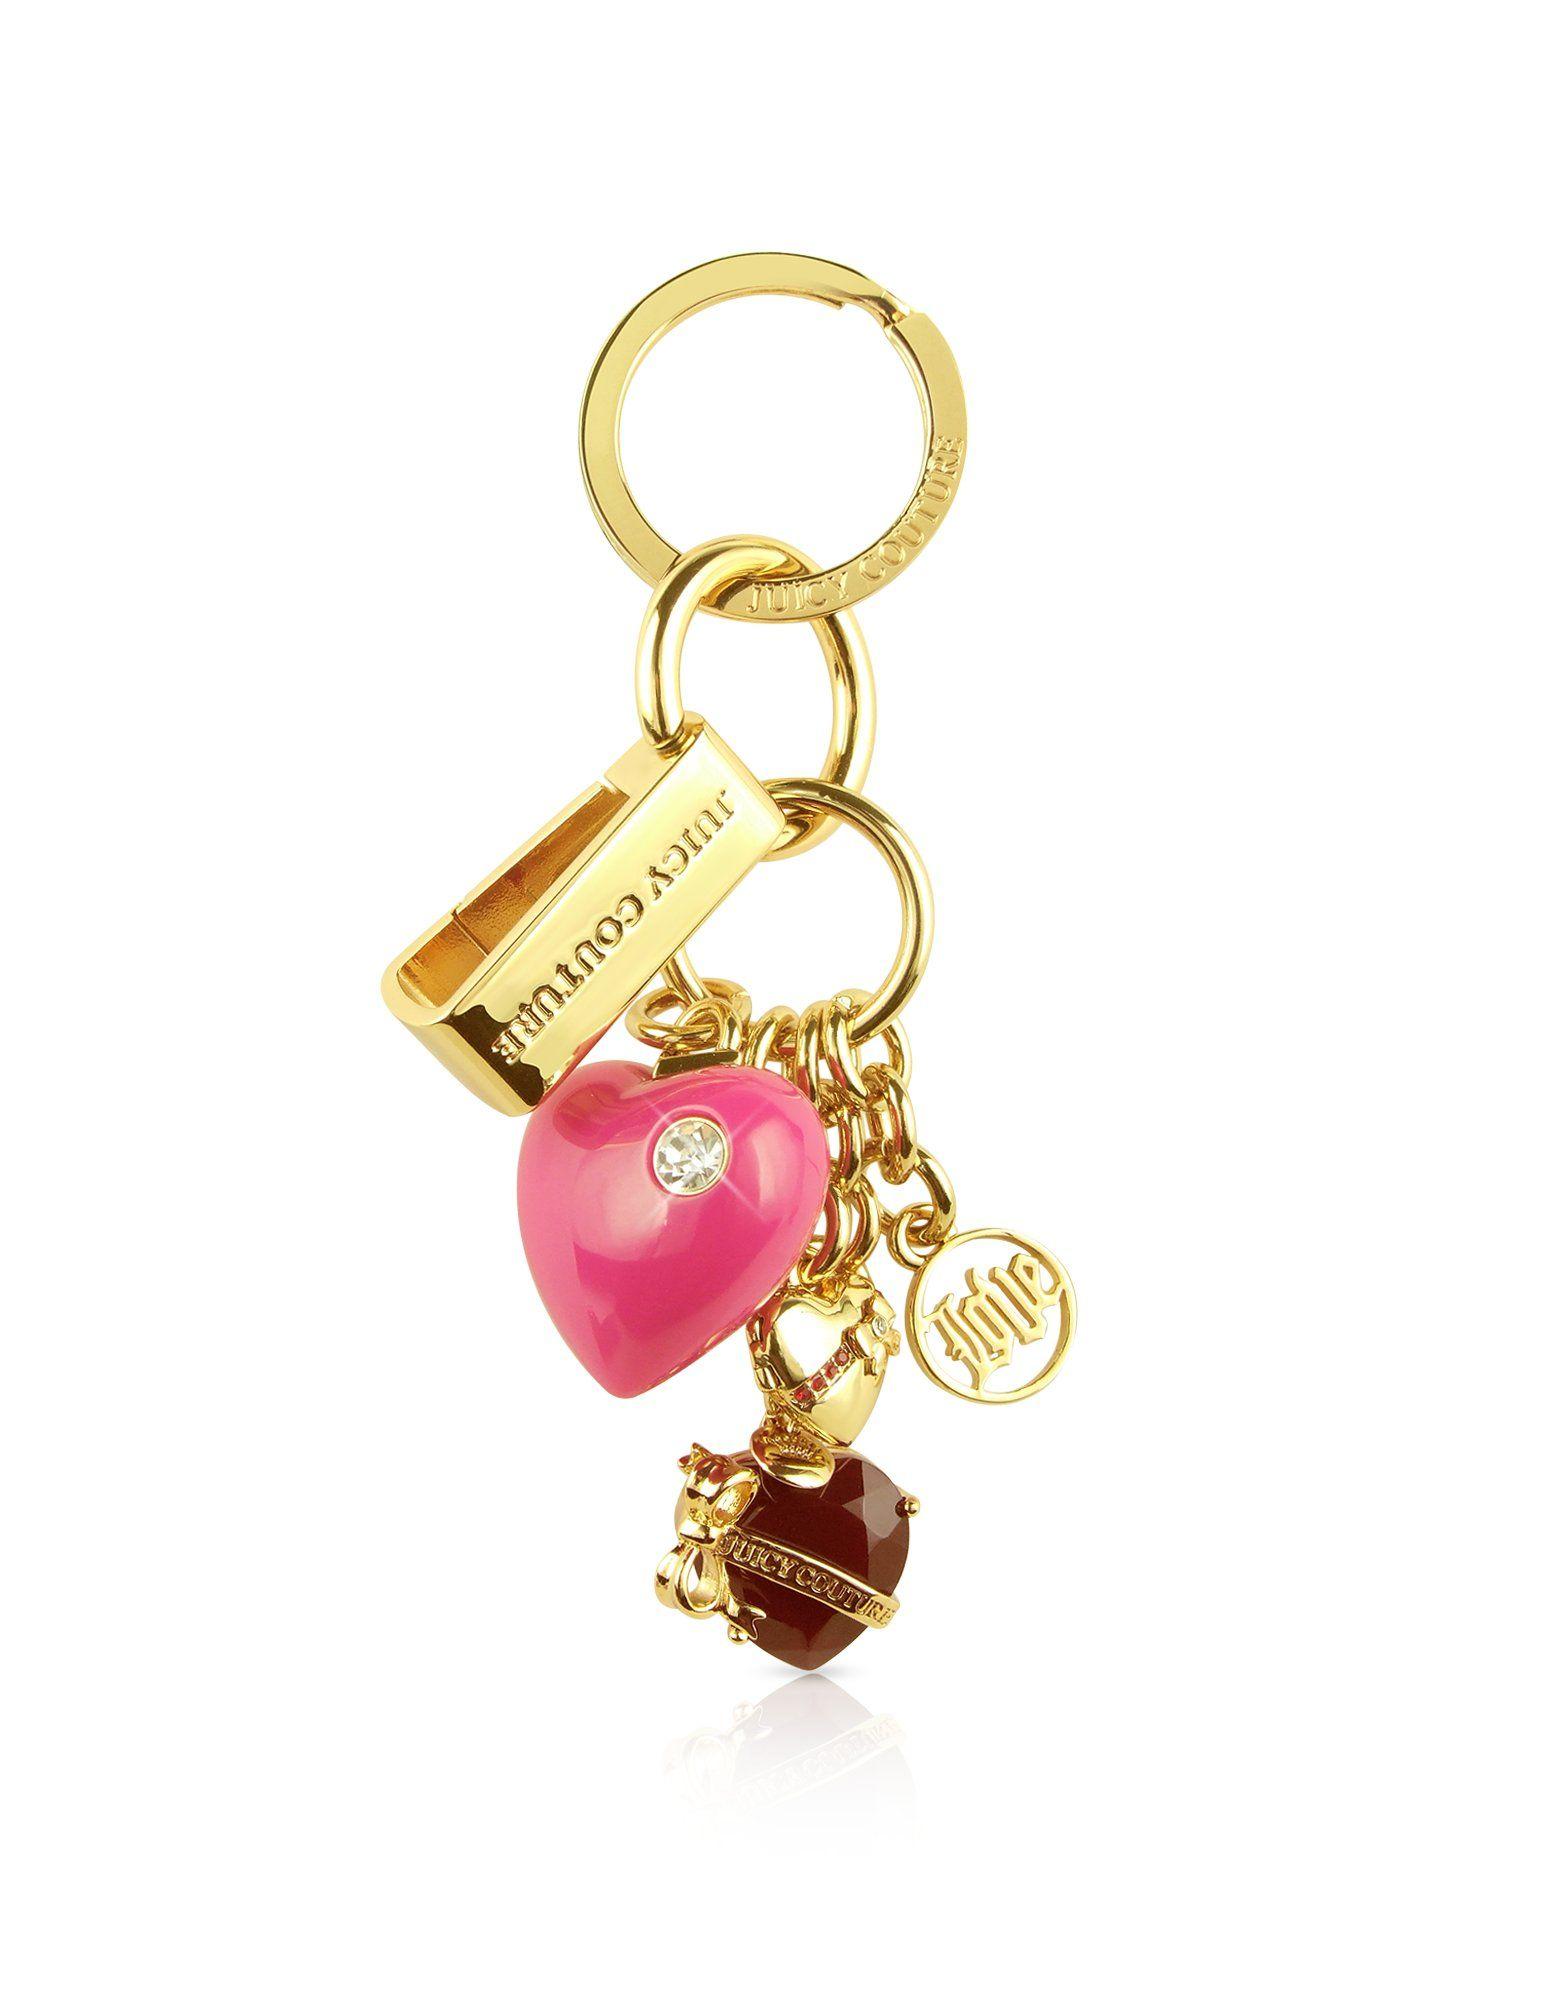 Juicy Couture Hearts Logo - Juicy Couture Mini Hearts Key Fob in Pink